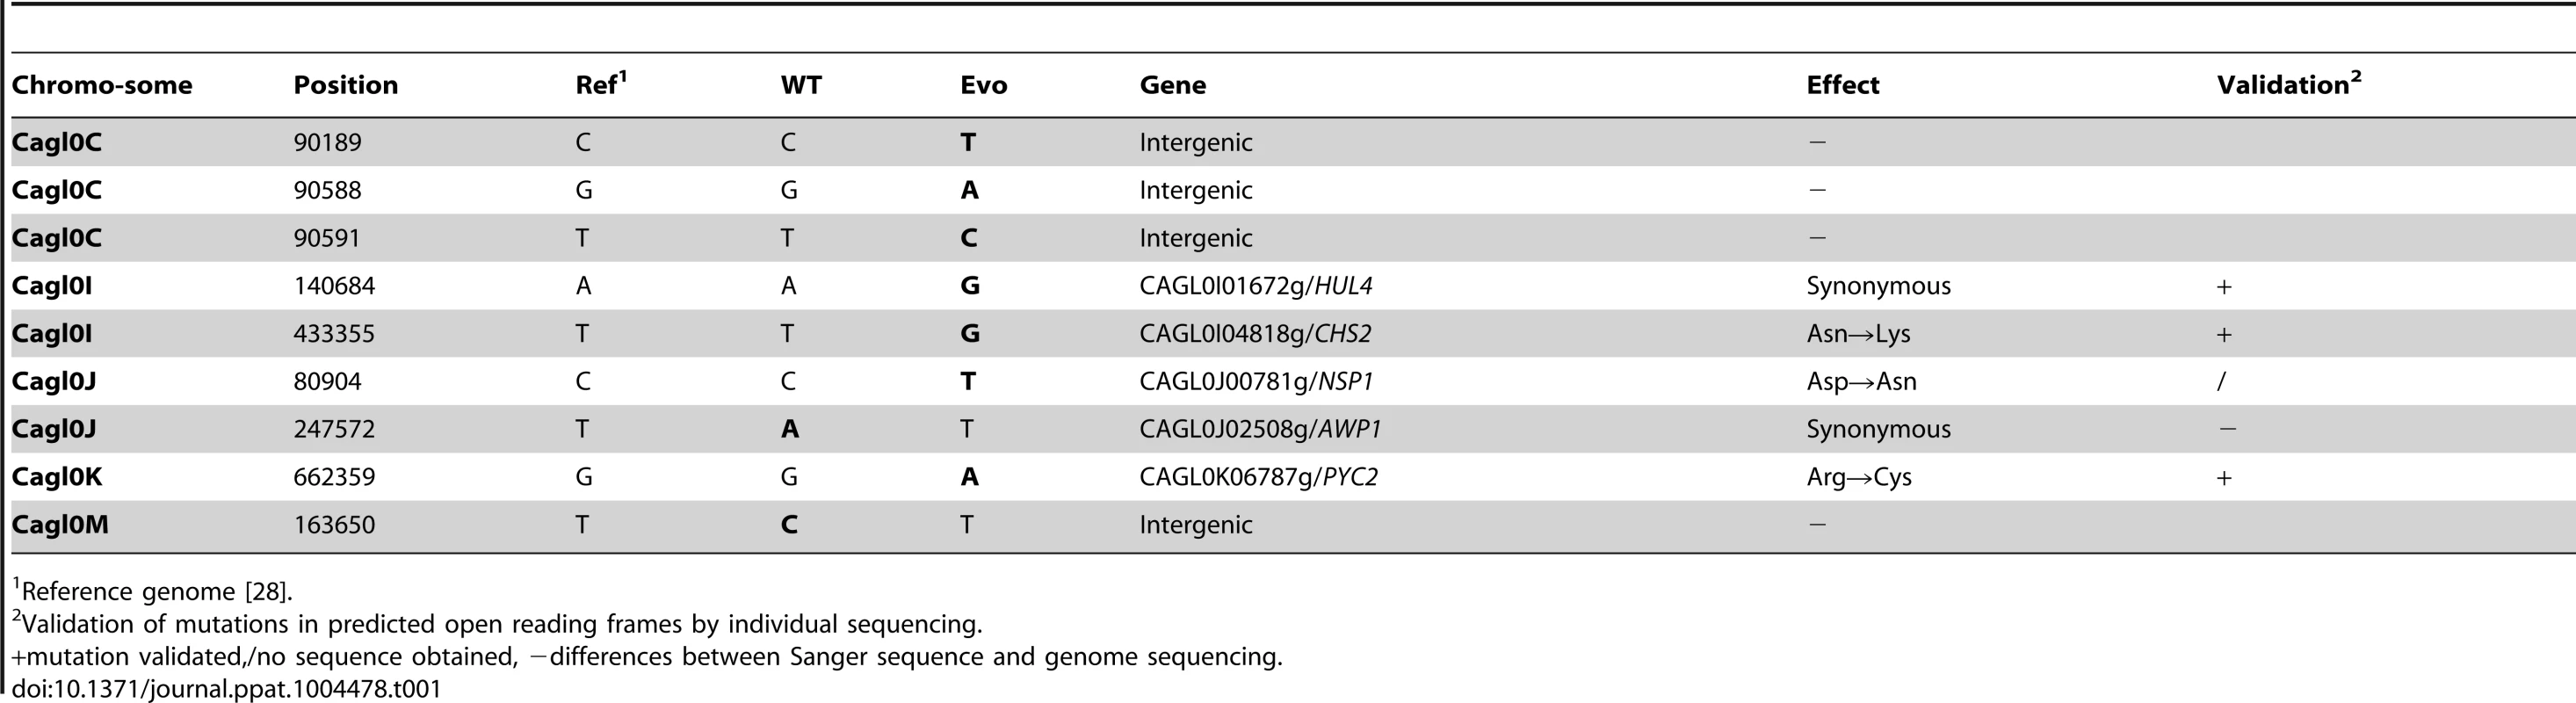 Single Nucleotide Polymorphisms distinguishing the wild type (WT) and the evolved strain (Evo).